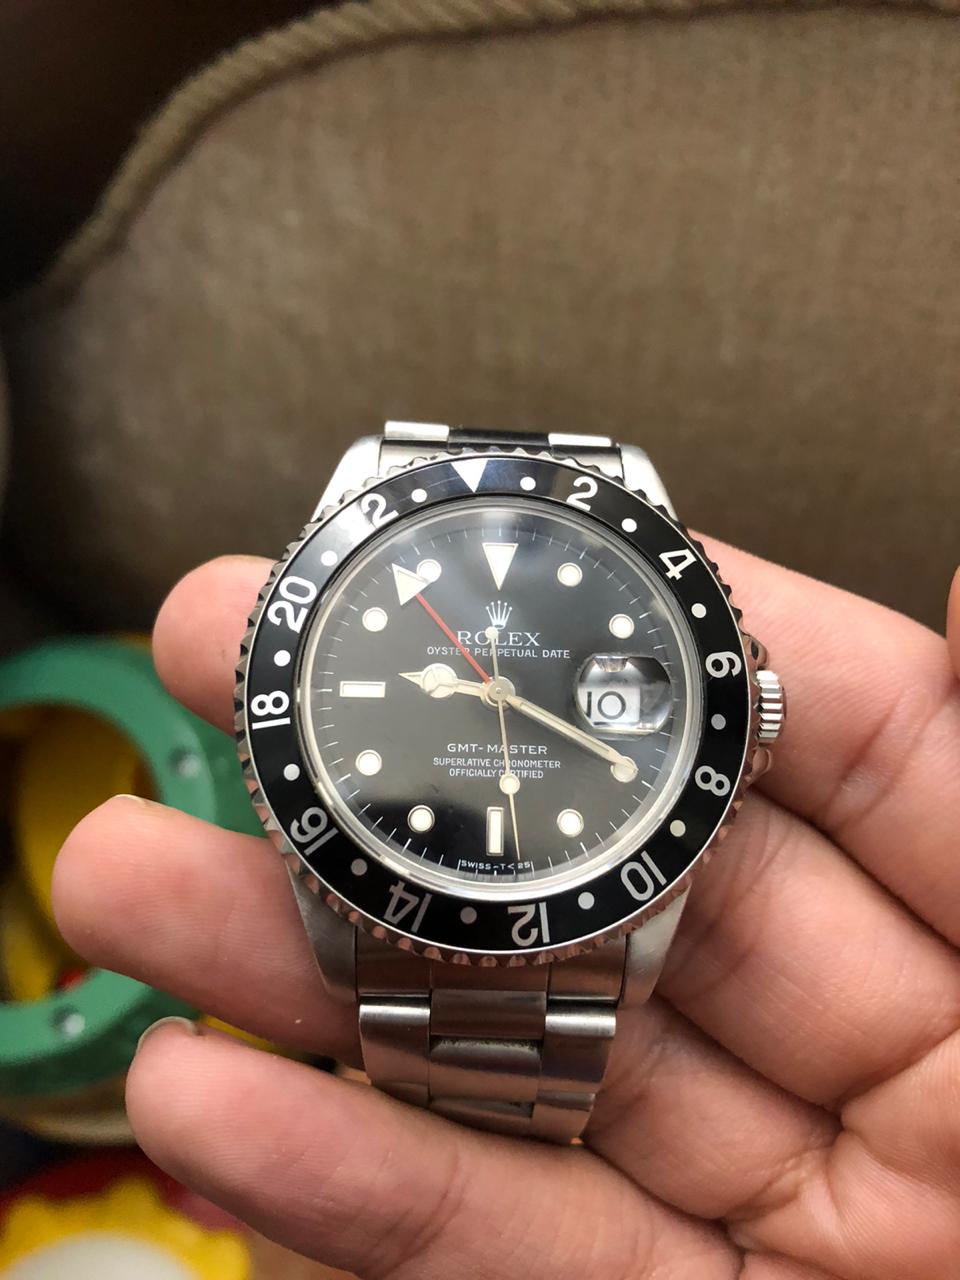 ALI ROLEX STORE-USED WATCHES BUYING